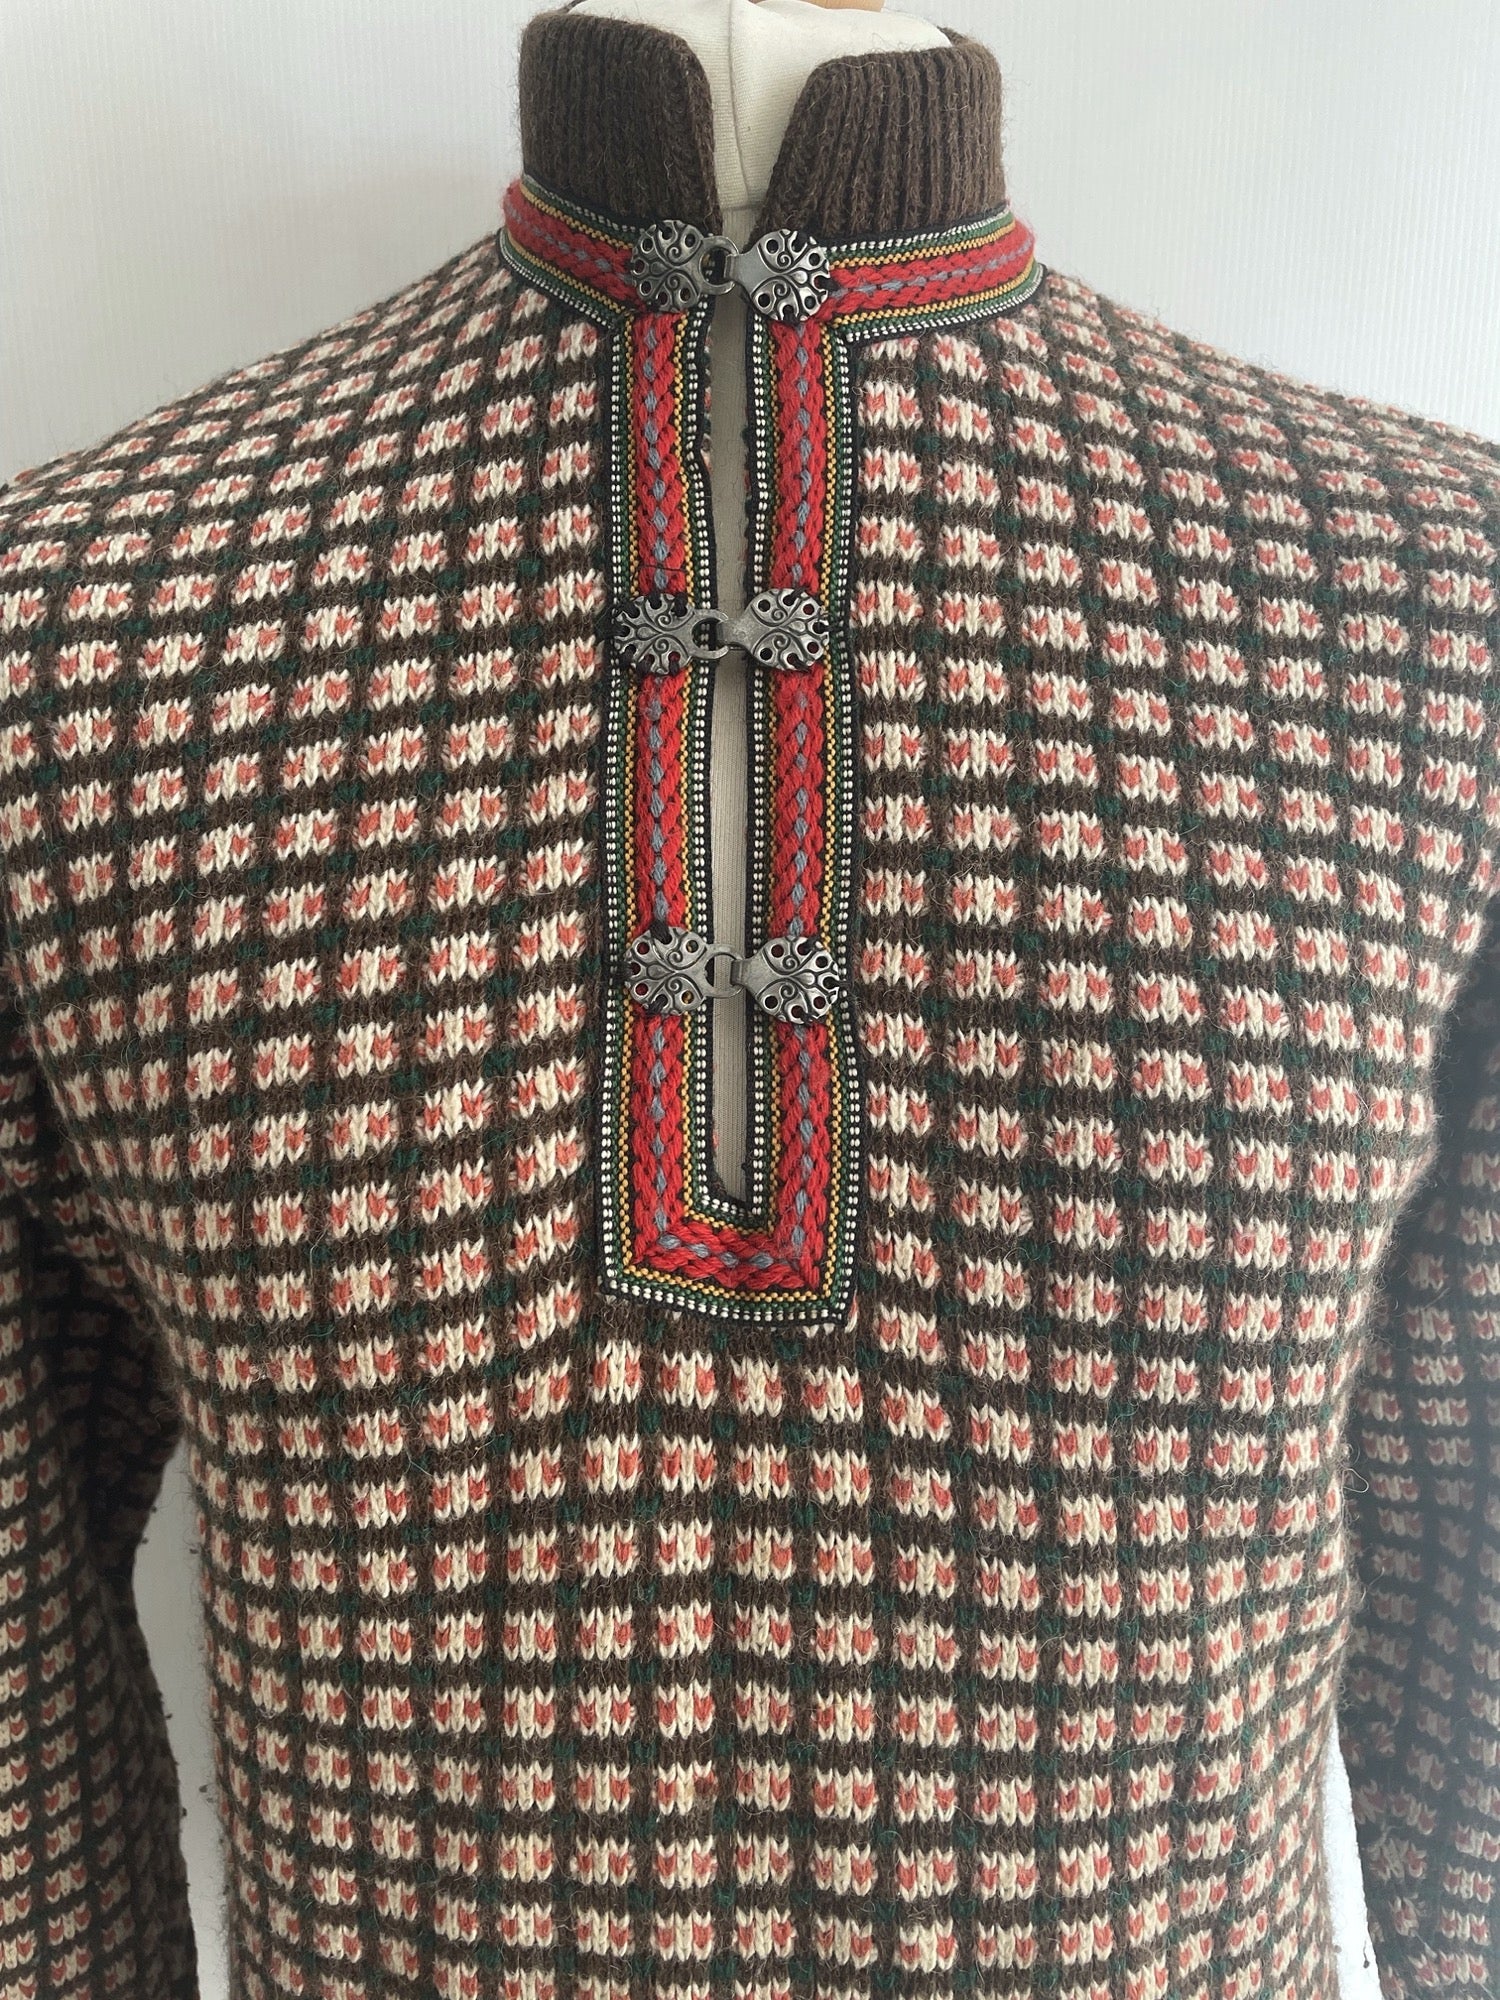 vintage  Urban Village Vintage  urban village  square pattern  roll neck  patterned  pattern  mens  M  long sleeves  Long sleeved top  long sleeved  long sleeve  knitwear  knitted  knit  hook and eye  high neck  heavyweight  ethnic print  ethnic  elasticated  cuffs